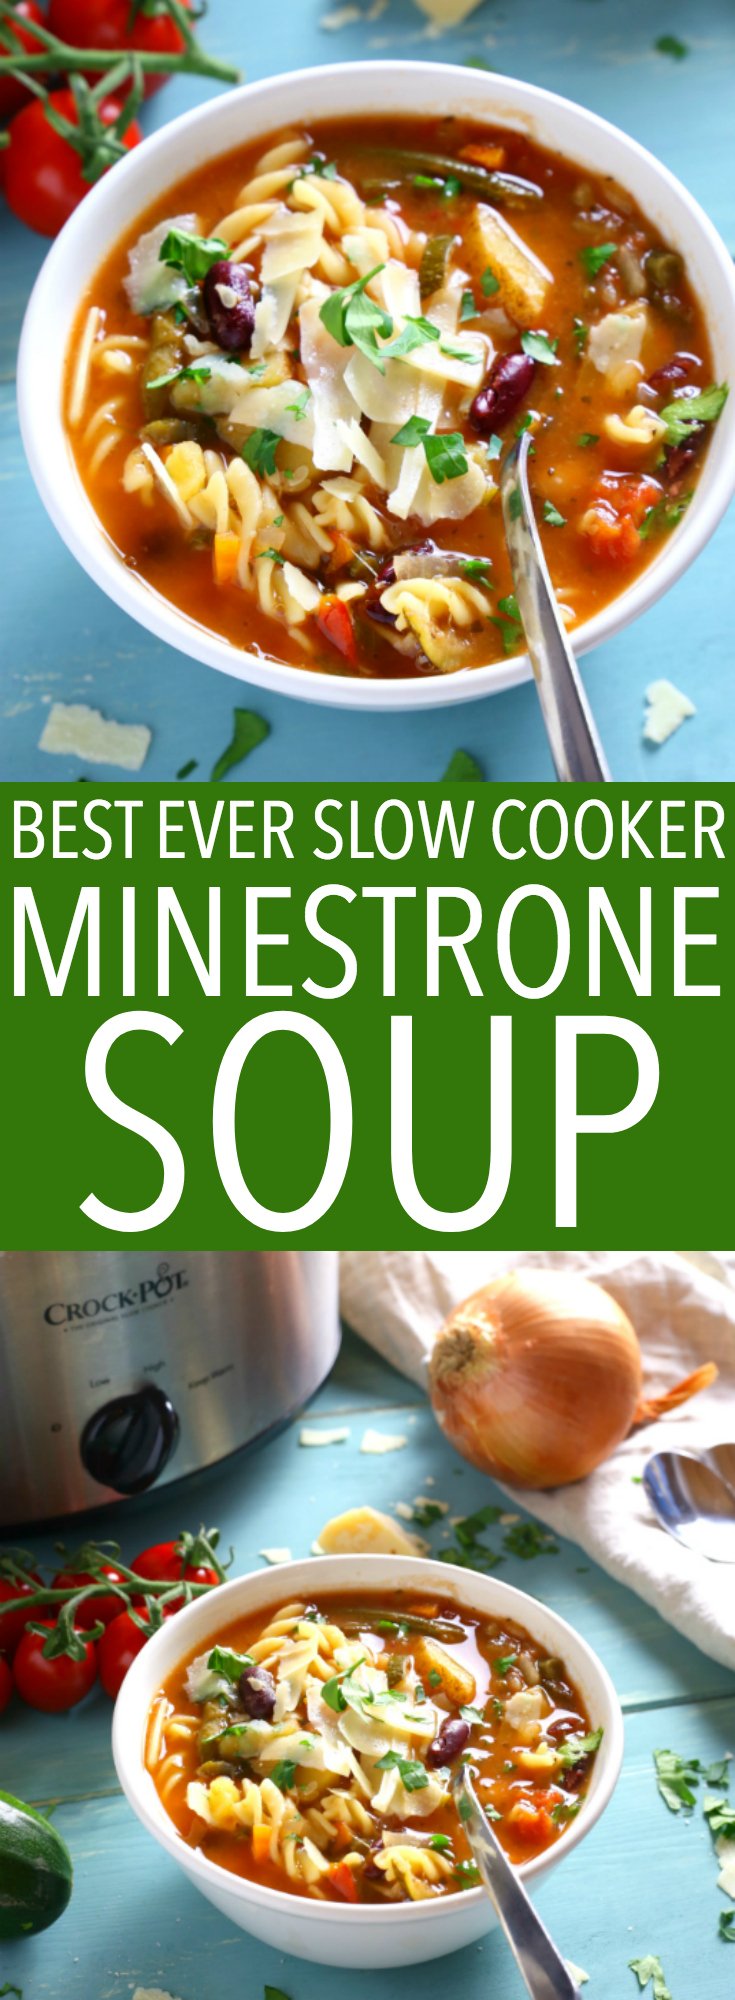 This Best Ever Slow Cooker Minestrone Soup is thick, comforting, and packed full of vegetables! It's so flavourful and easy to make, and it's the perfect way to warm up on a cold day! Recipe from thebusybaker.ca! #minestronesoup #slowcookersoup #slowcookerminestrone #besteverminestrone via @busybakerblog